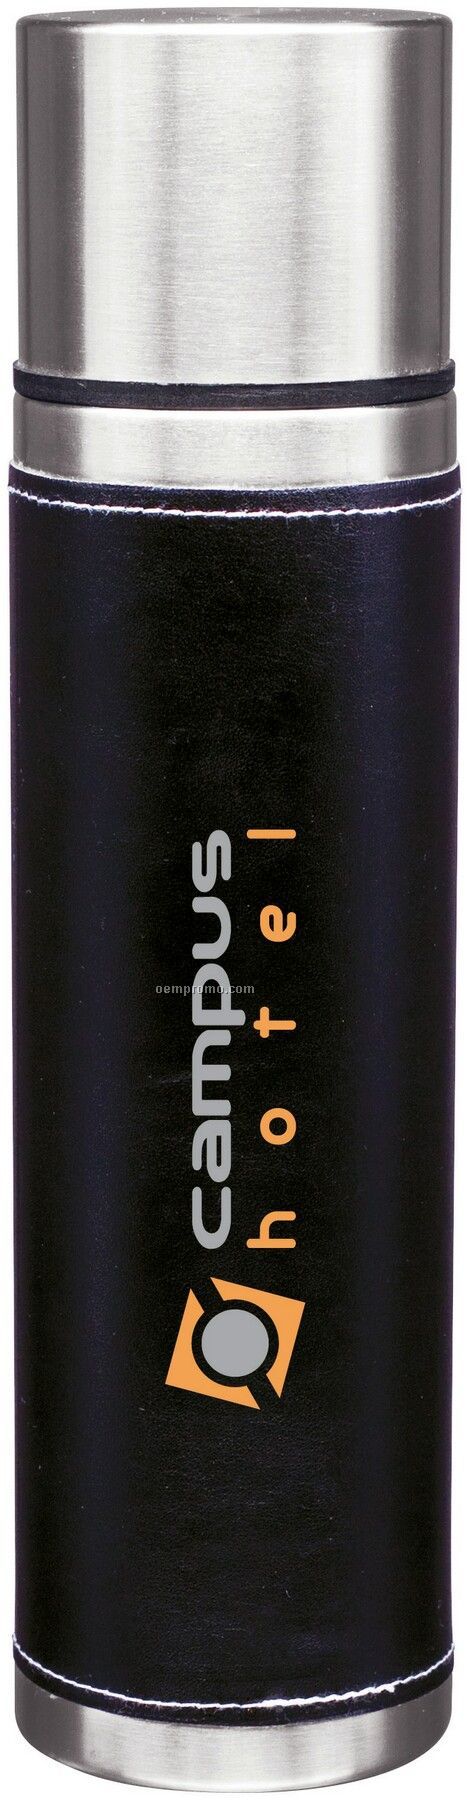 16.5 Oz. Stainless Steel Thermal Bottle With Black Leatherette Sleeve